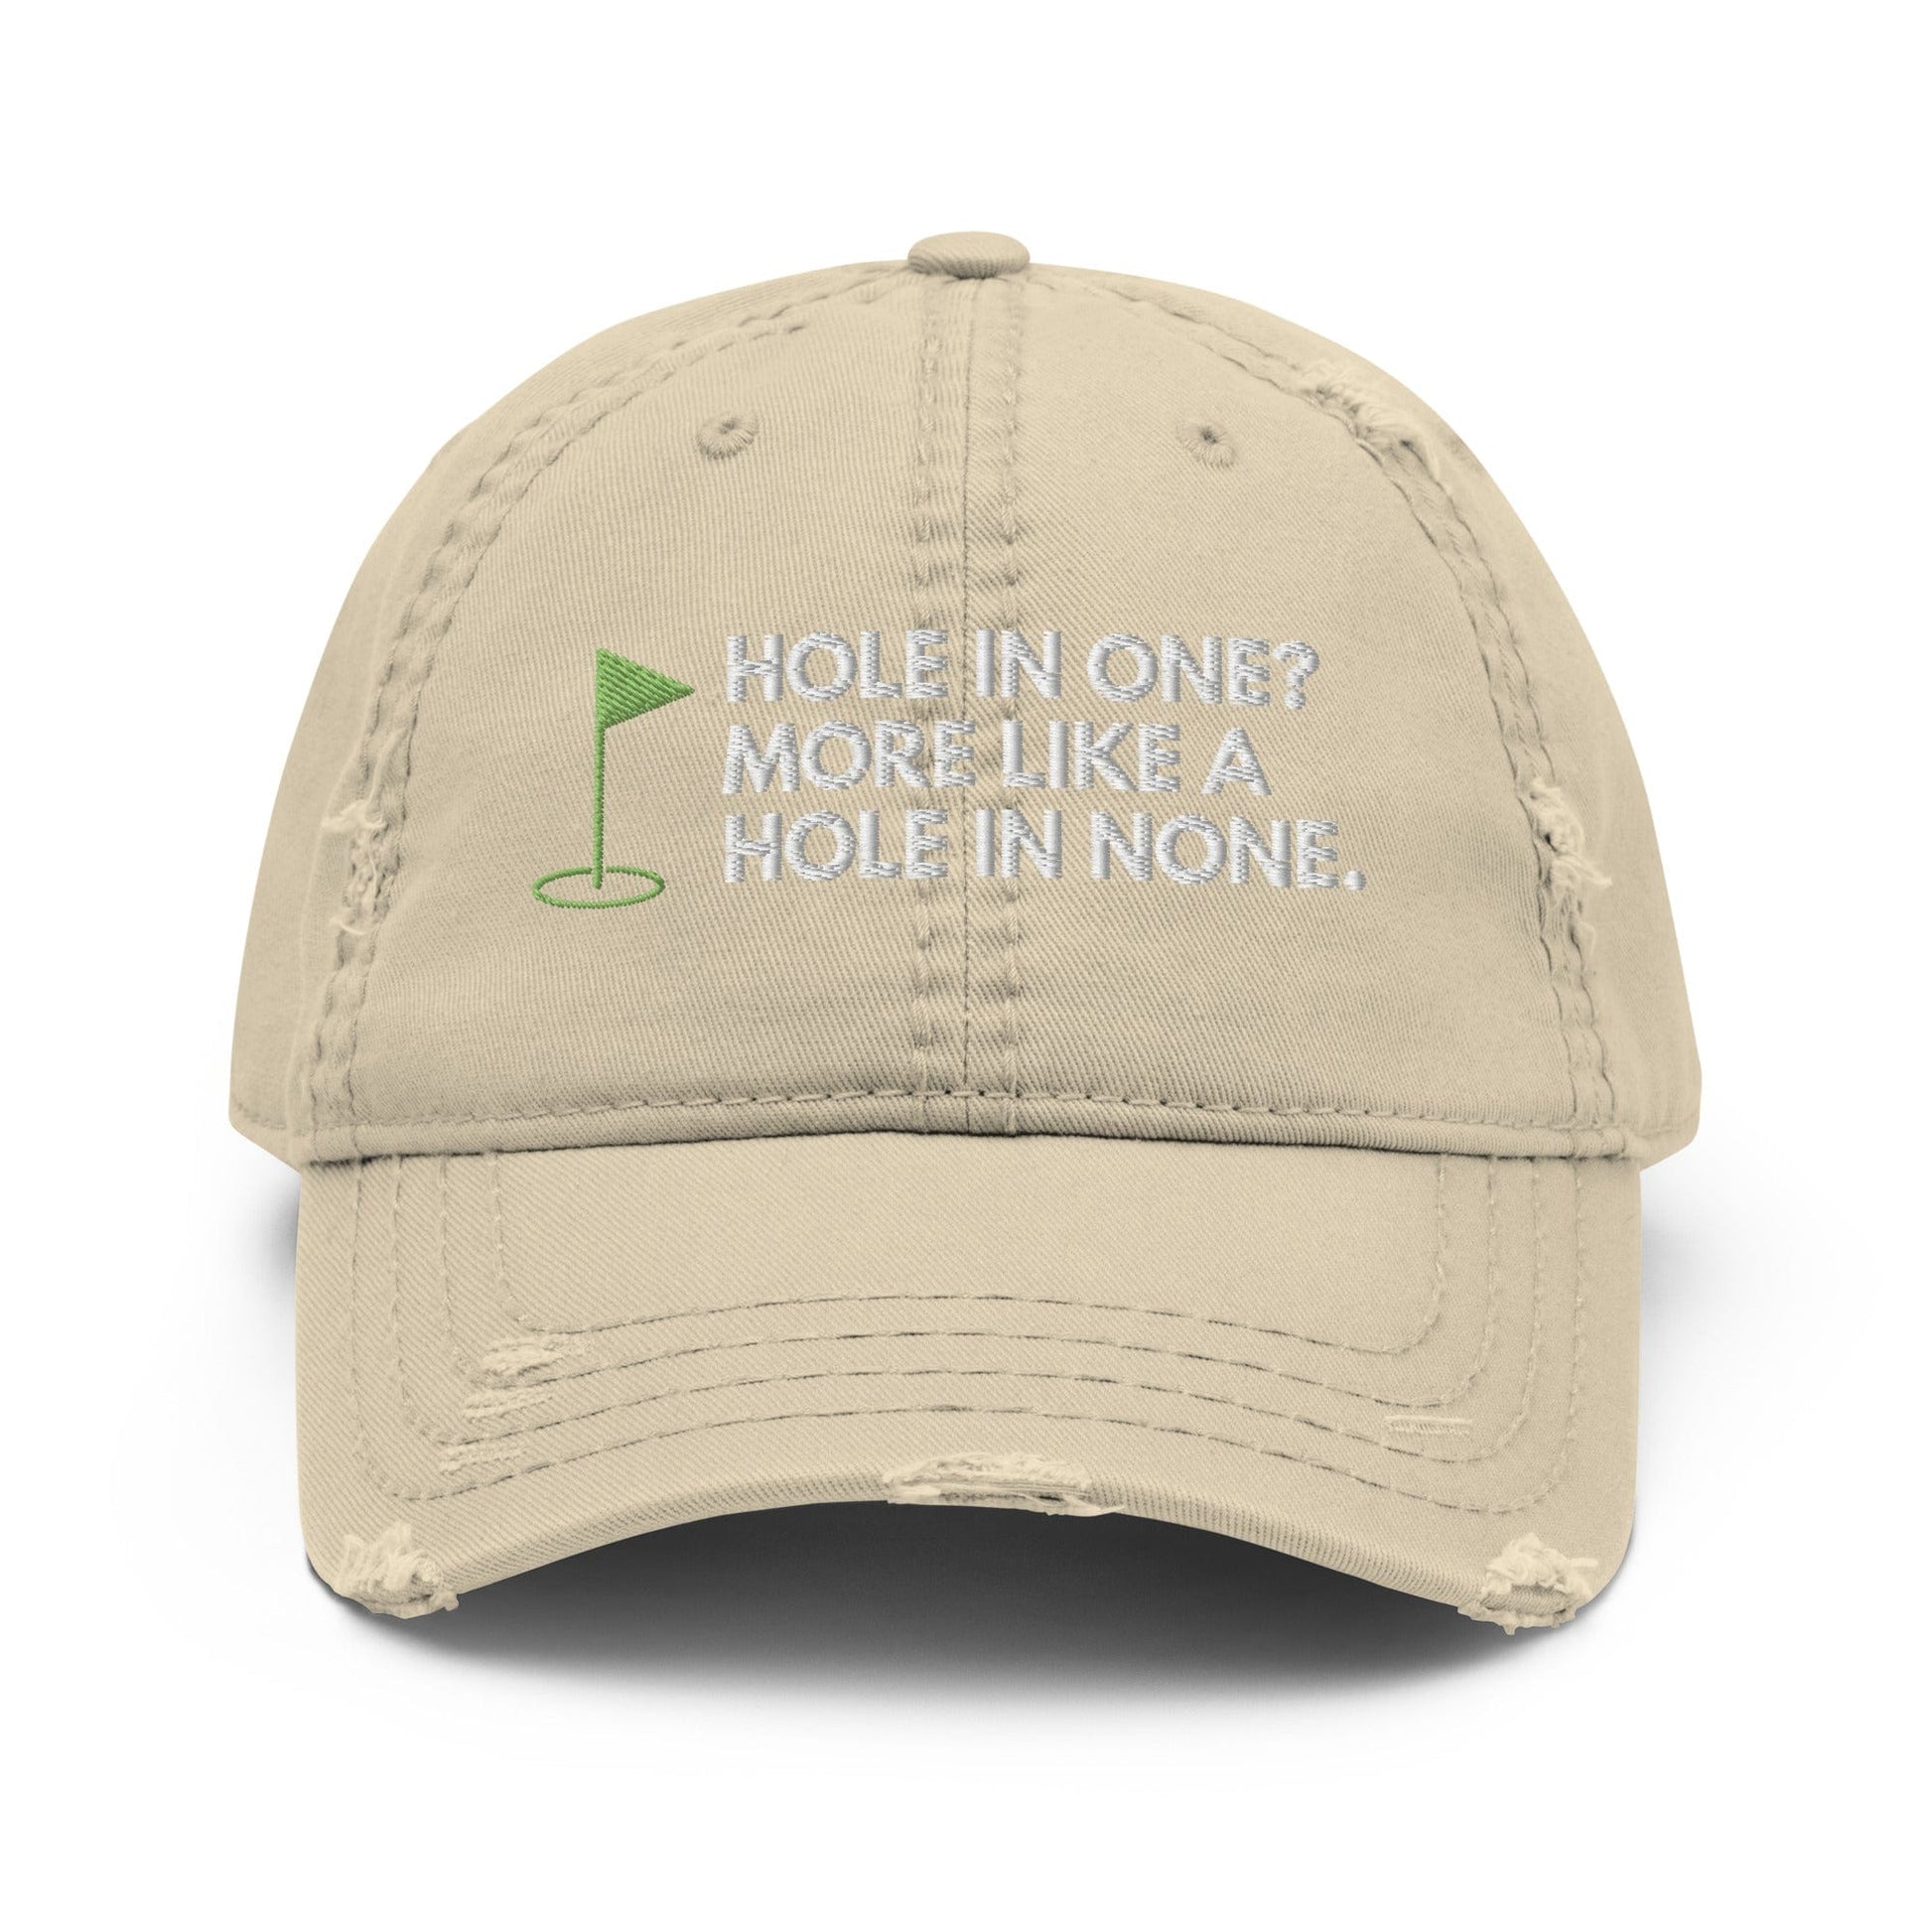 Funny Golfer Gifts  Distressed Cap Khaki Hole In One More Like Hole In None Hat Distressed Hat